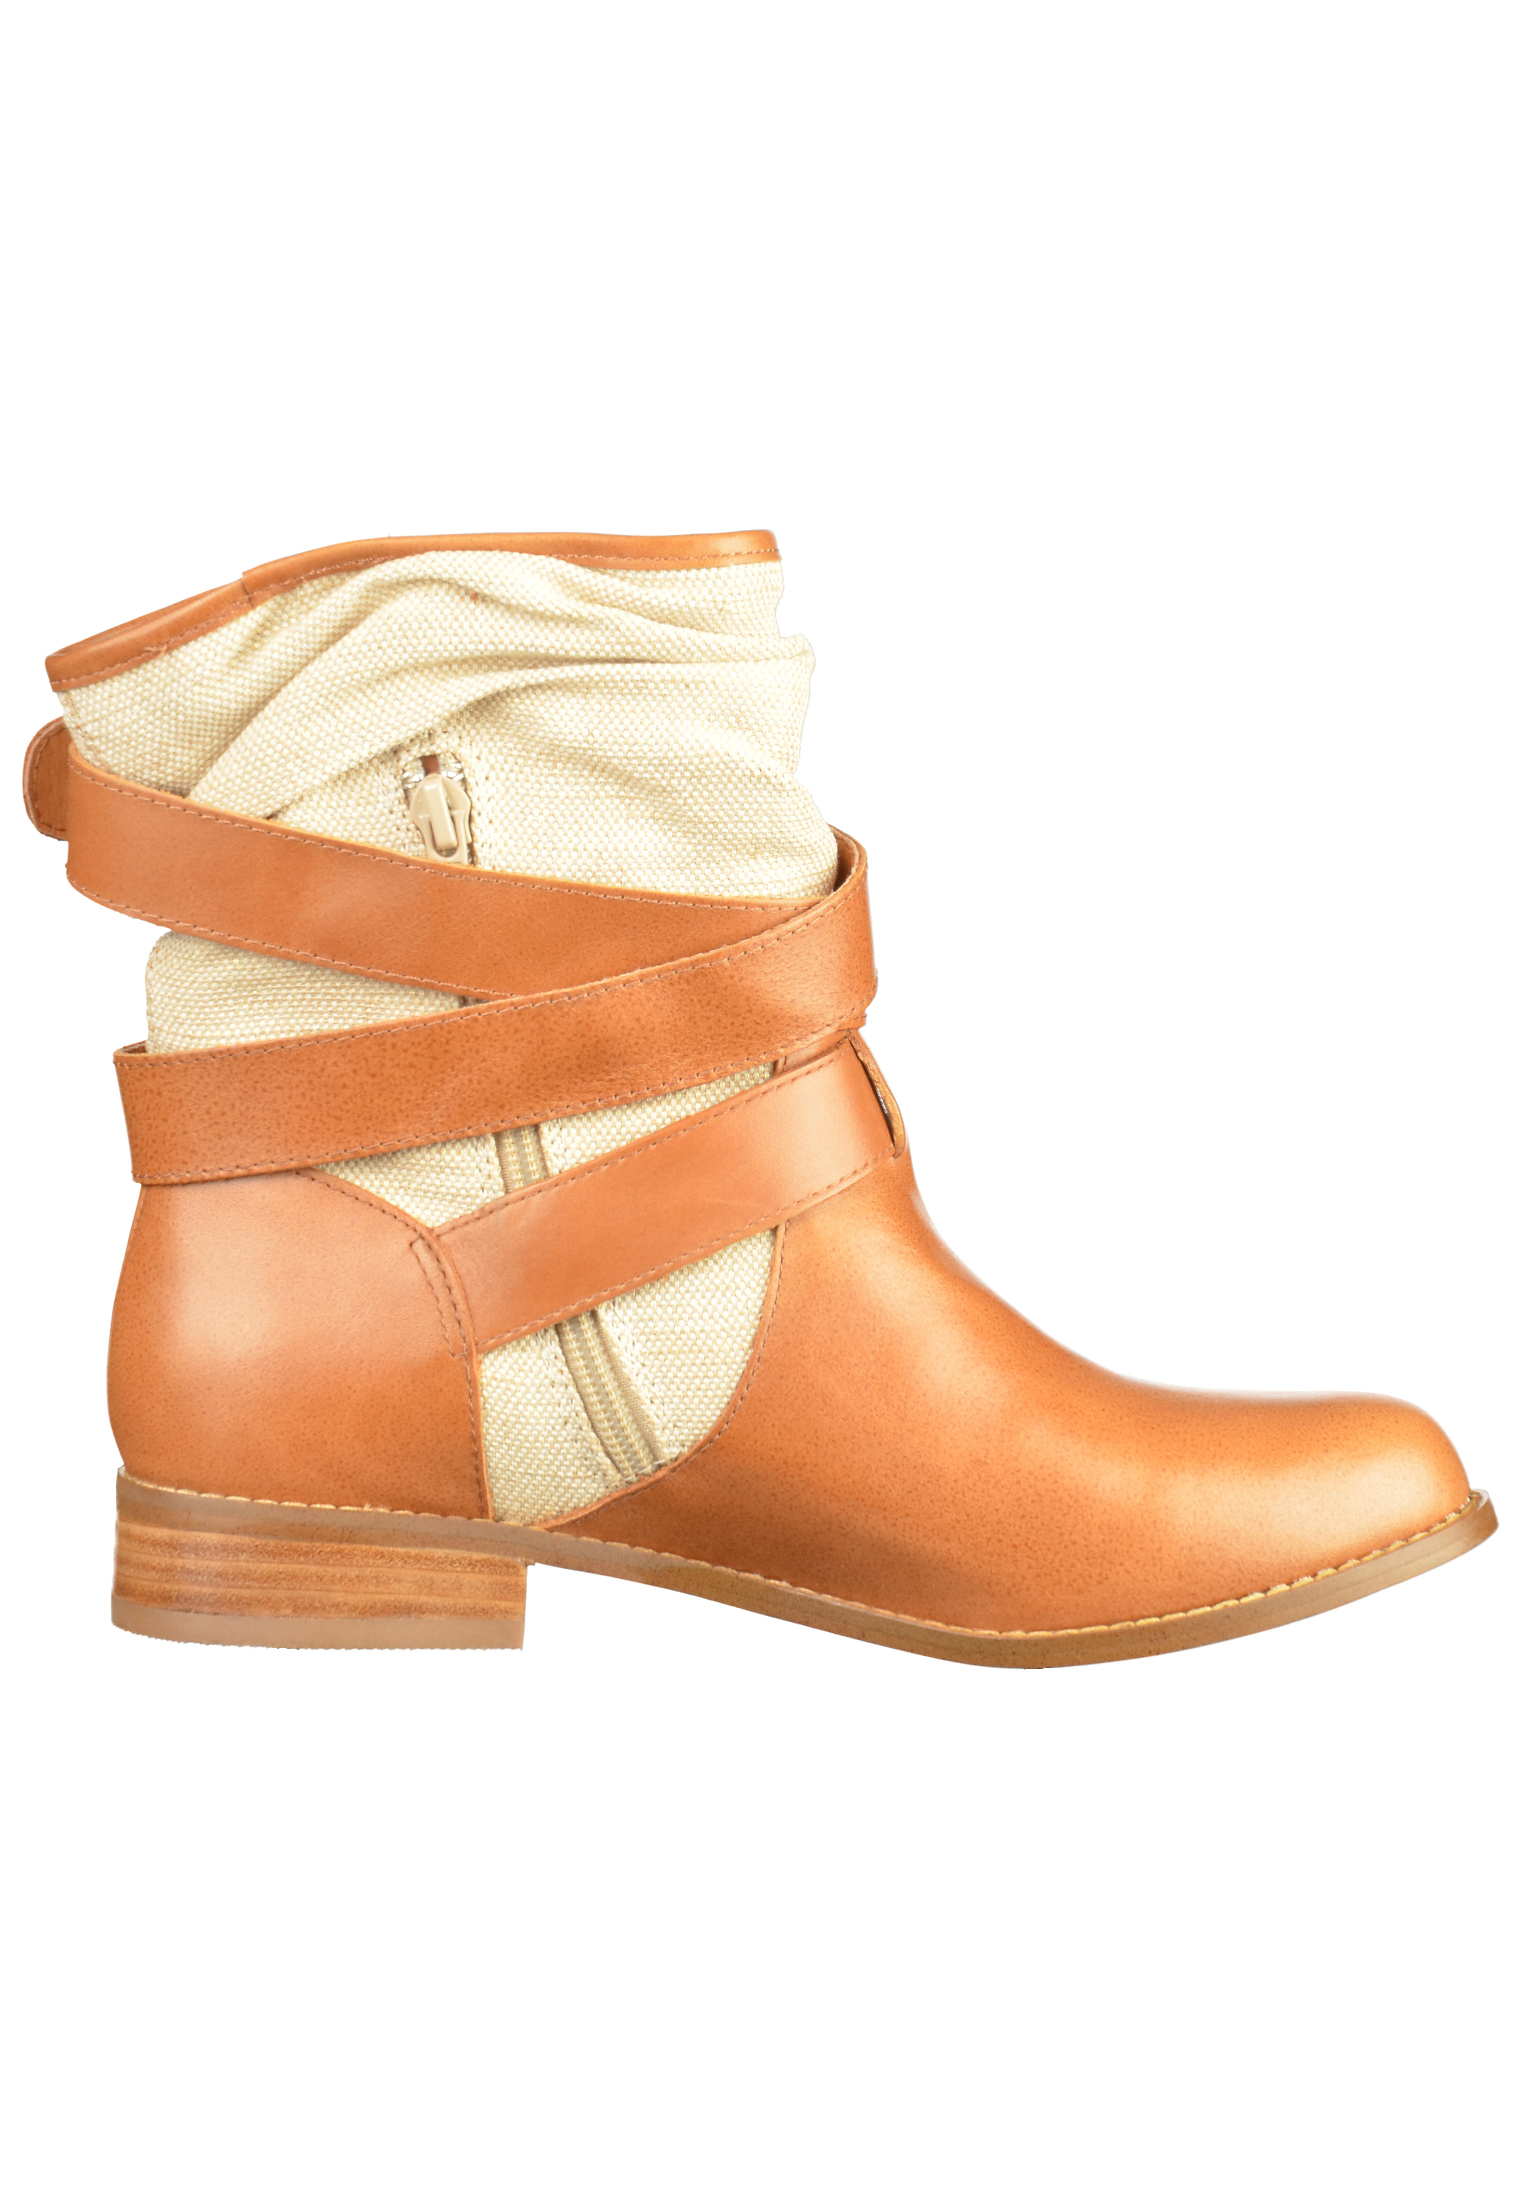 mellow yellow Stiefelette in Cognac, Cappuccino 